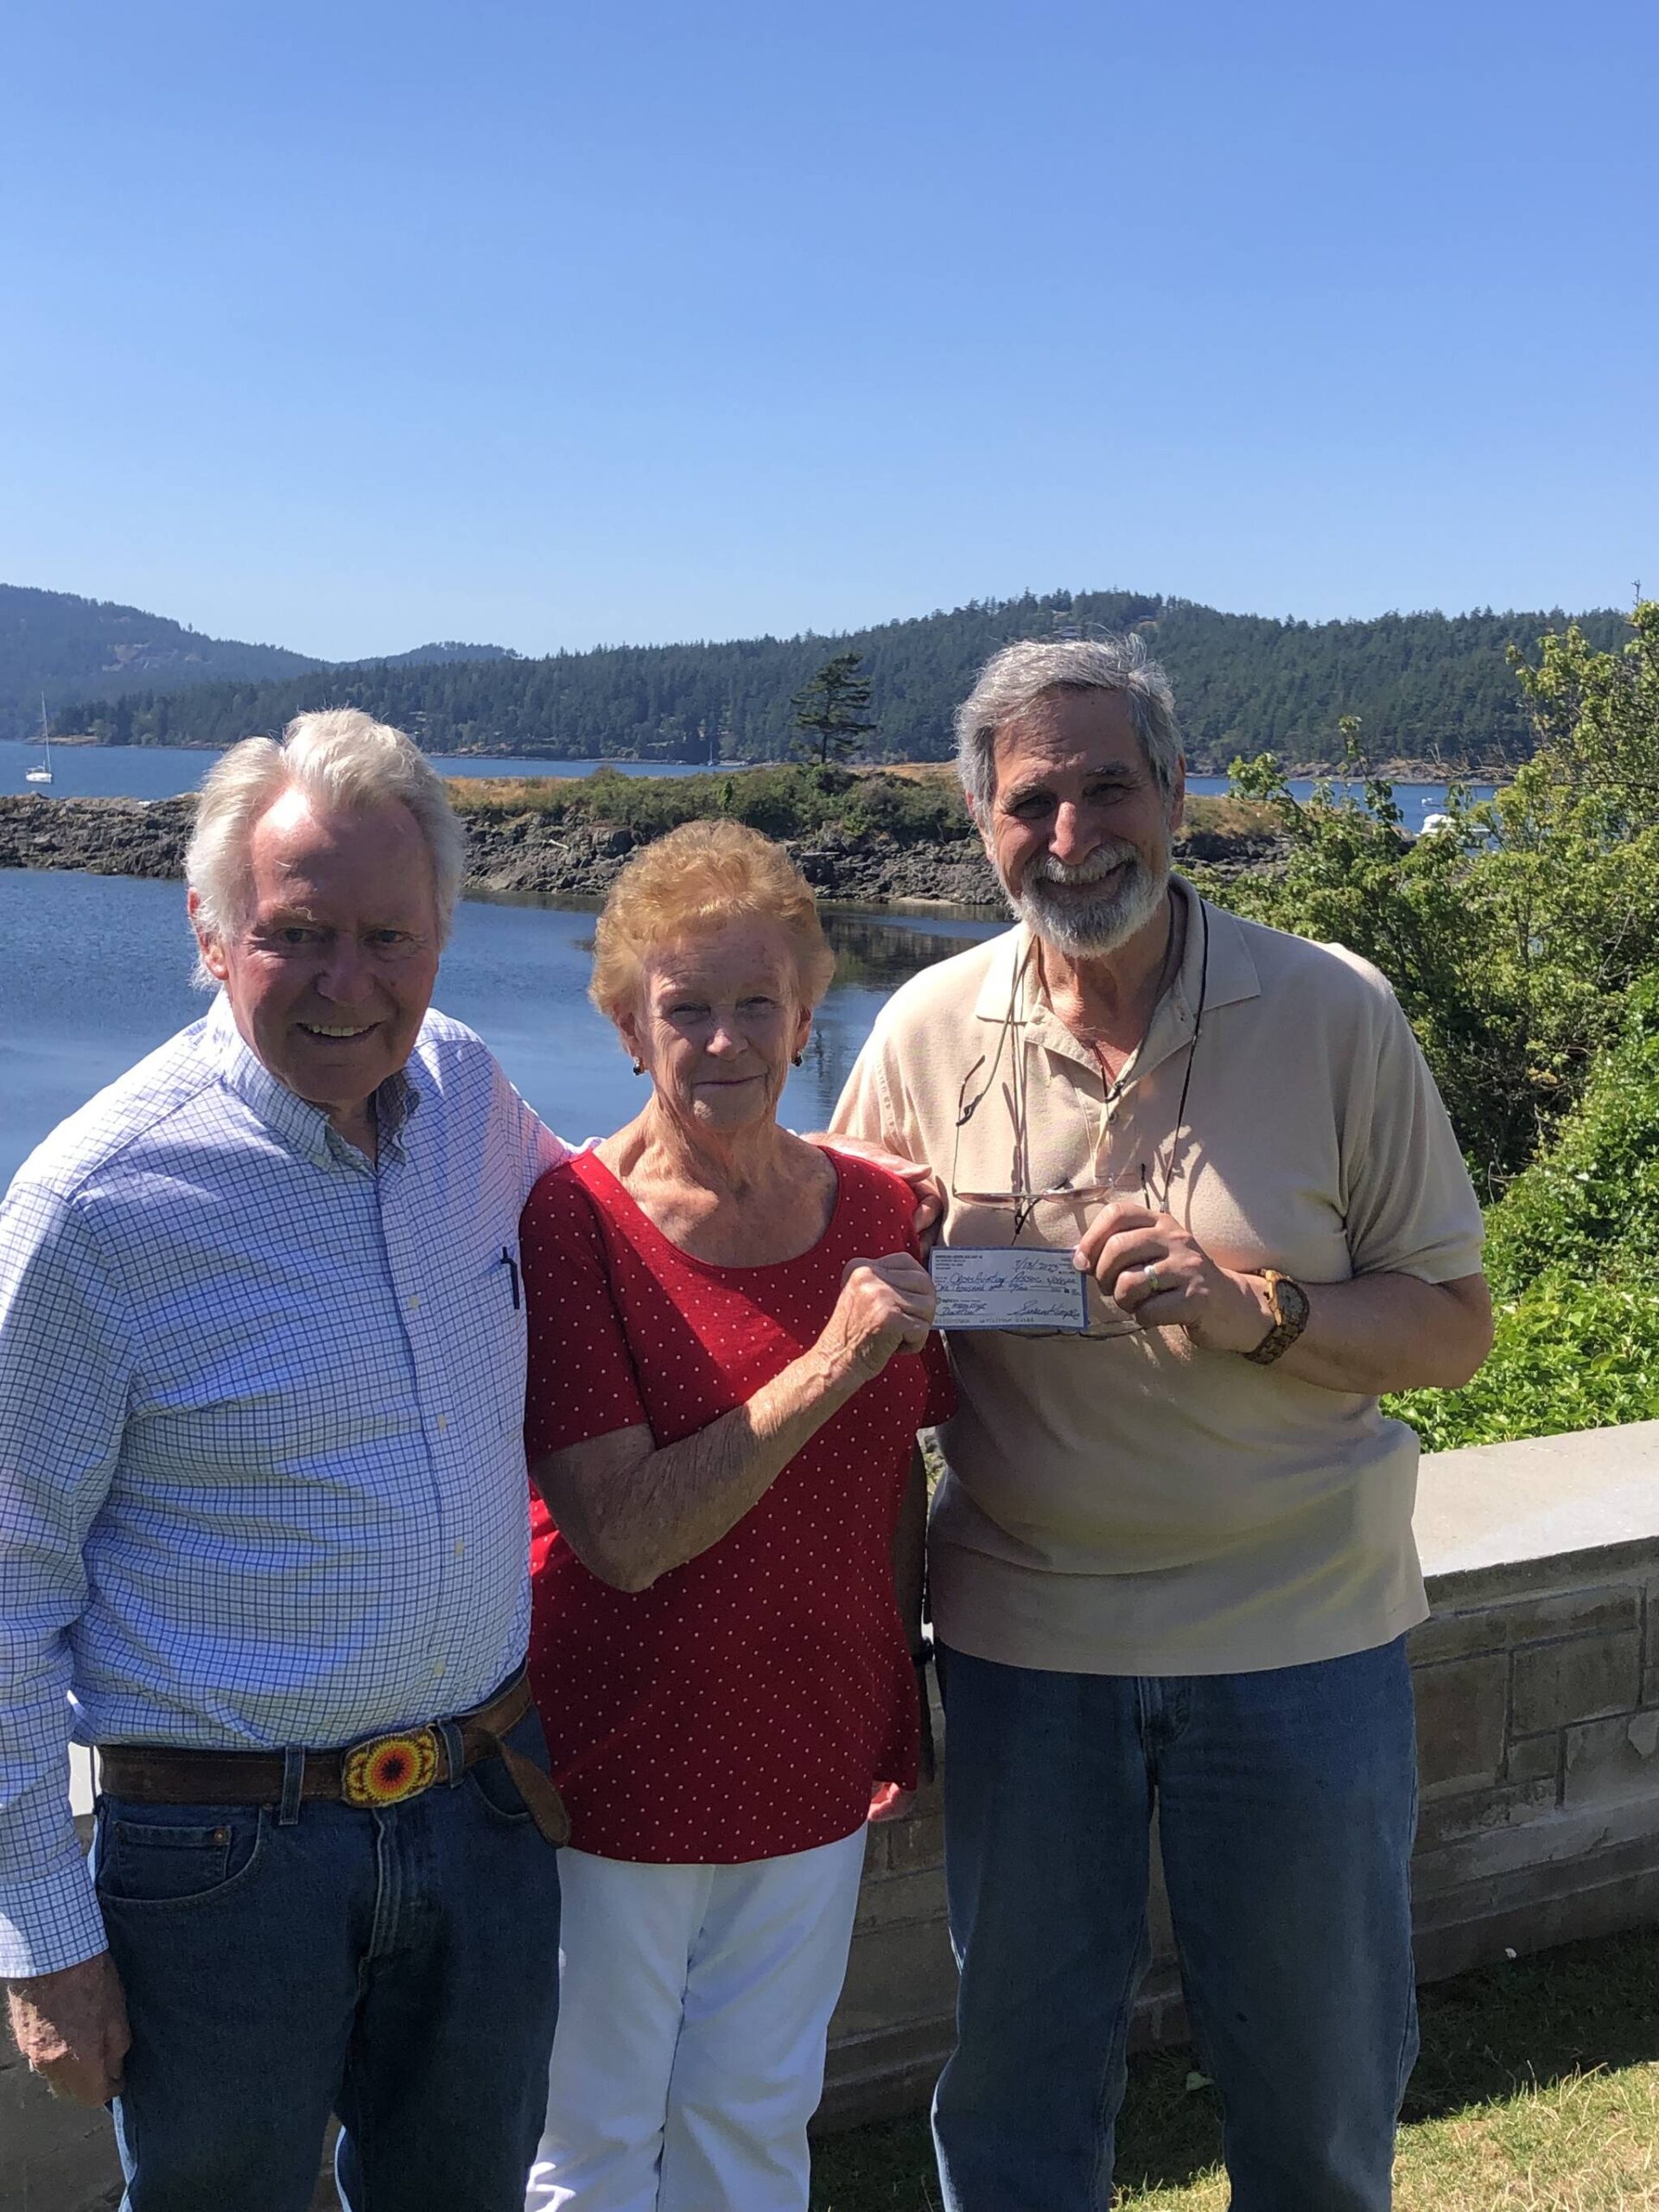 Contributed photo.
L-R: Gill Blinn, pilot in the program, Jan Cleveland, American Legion Auxiliary Chaplain and Jack Becker, Treasurer of the Orcas Aviation Association.